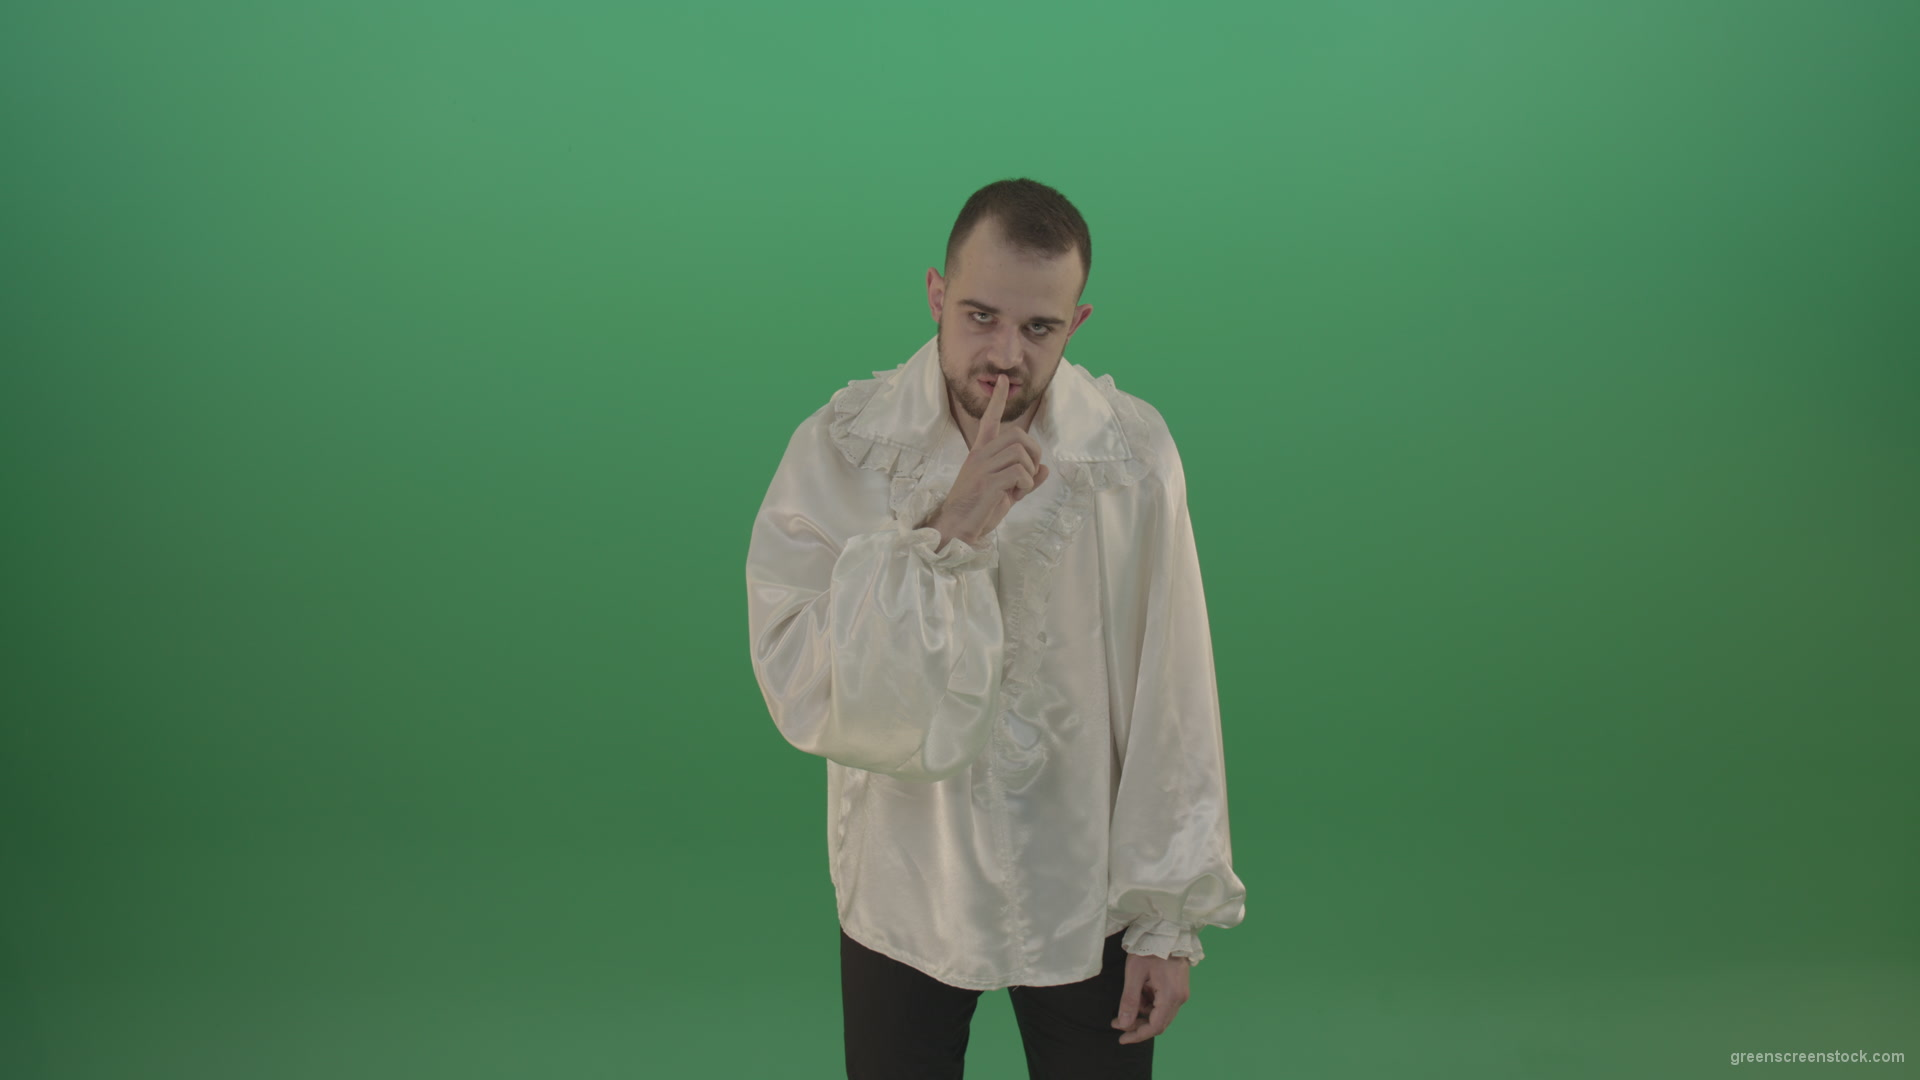 Maniac-man-was-very-angry-asking-for-silence-showing-sign-isolated-in-green-screen-studio_006 Green Screen Stock